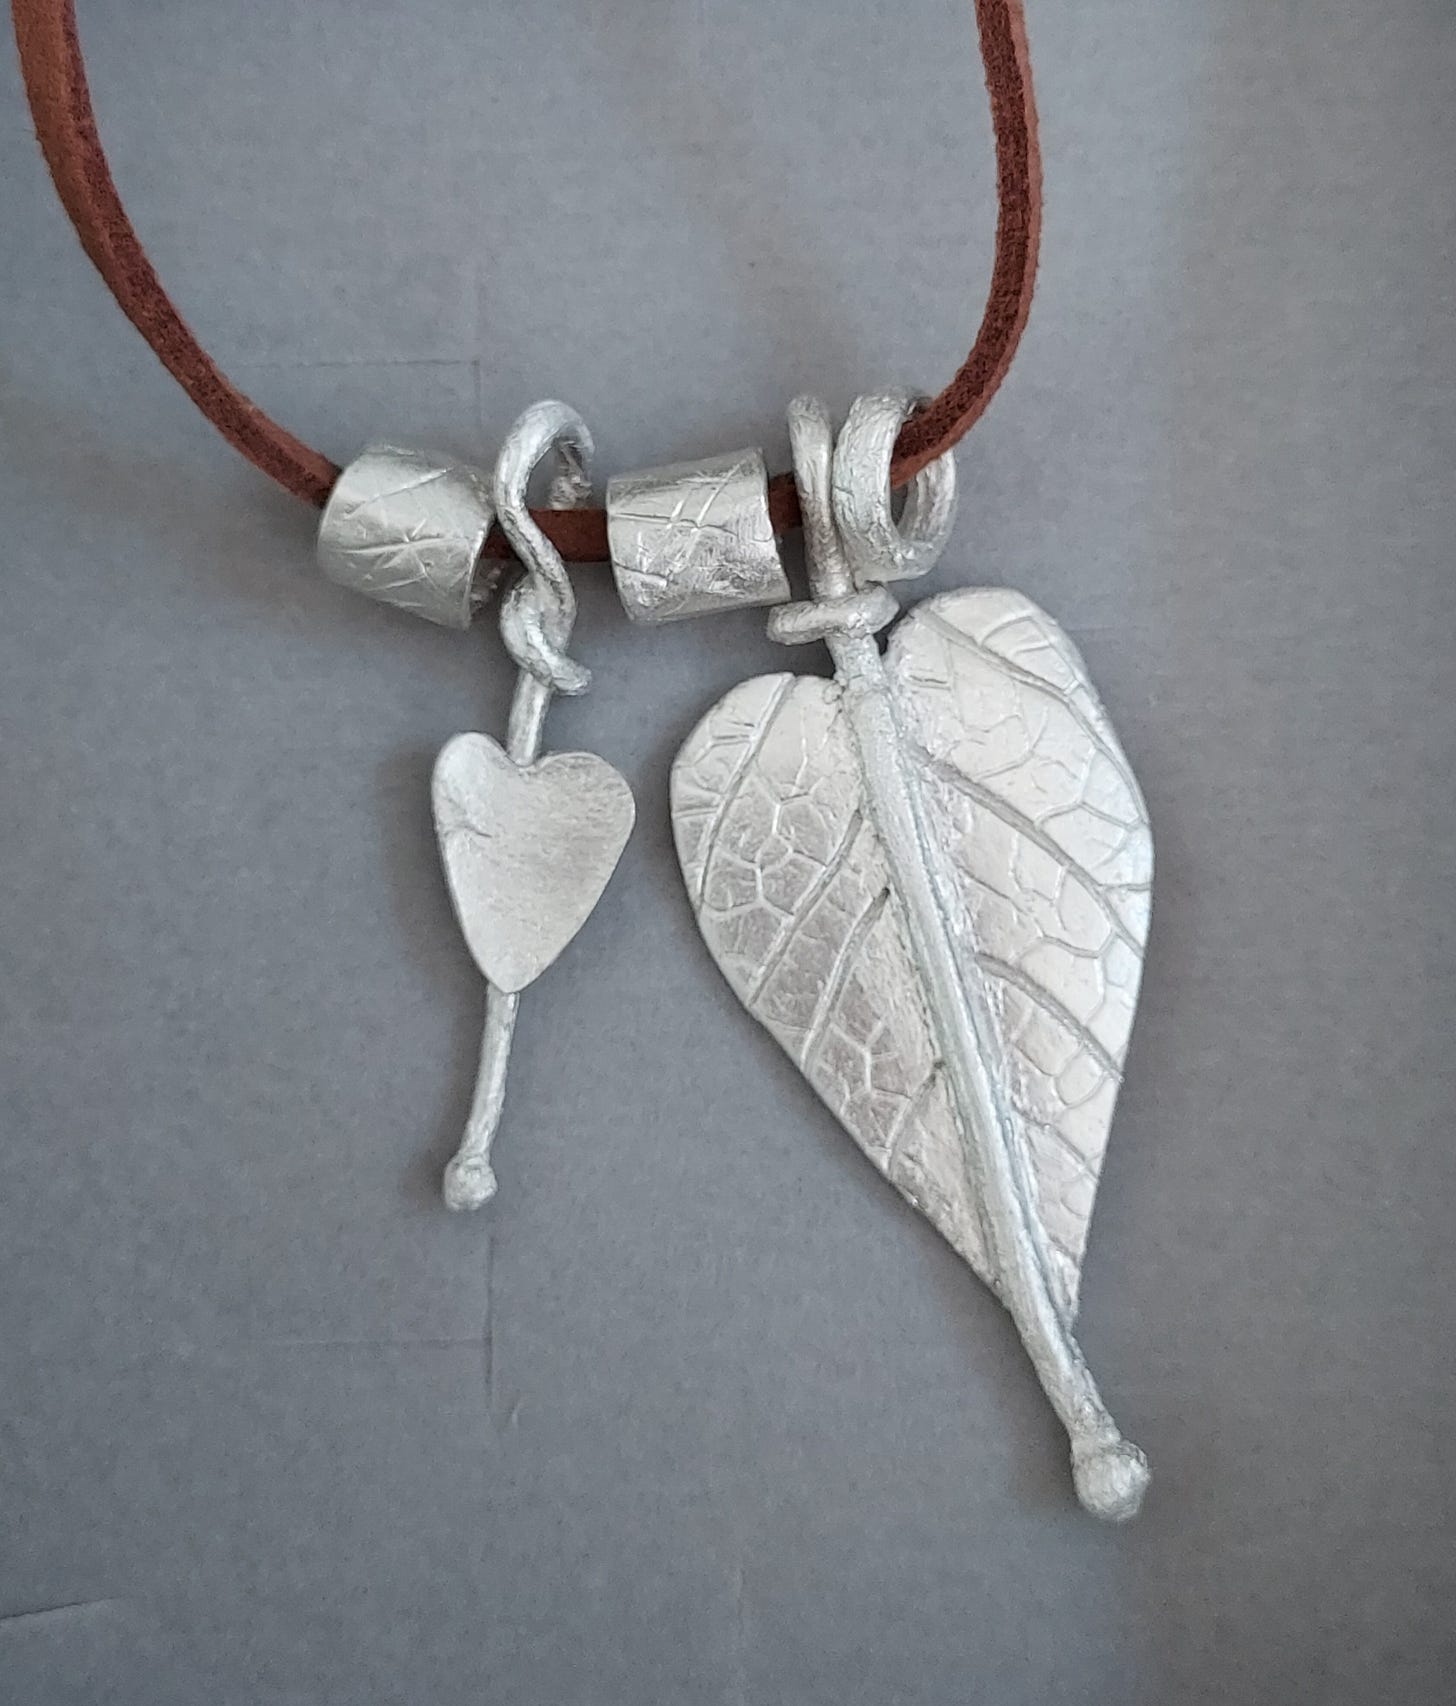 Silver leaf pendants on a brown leather cord